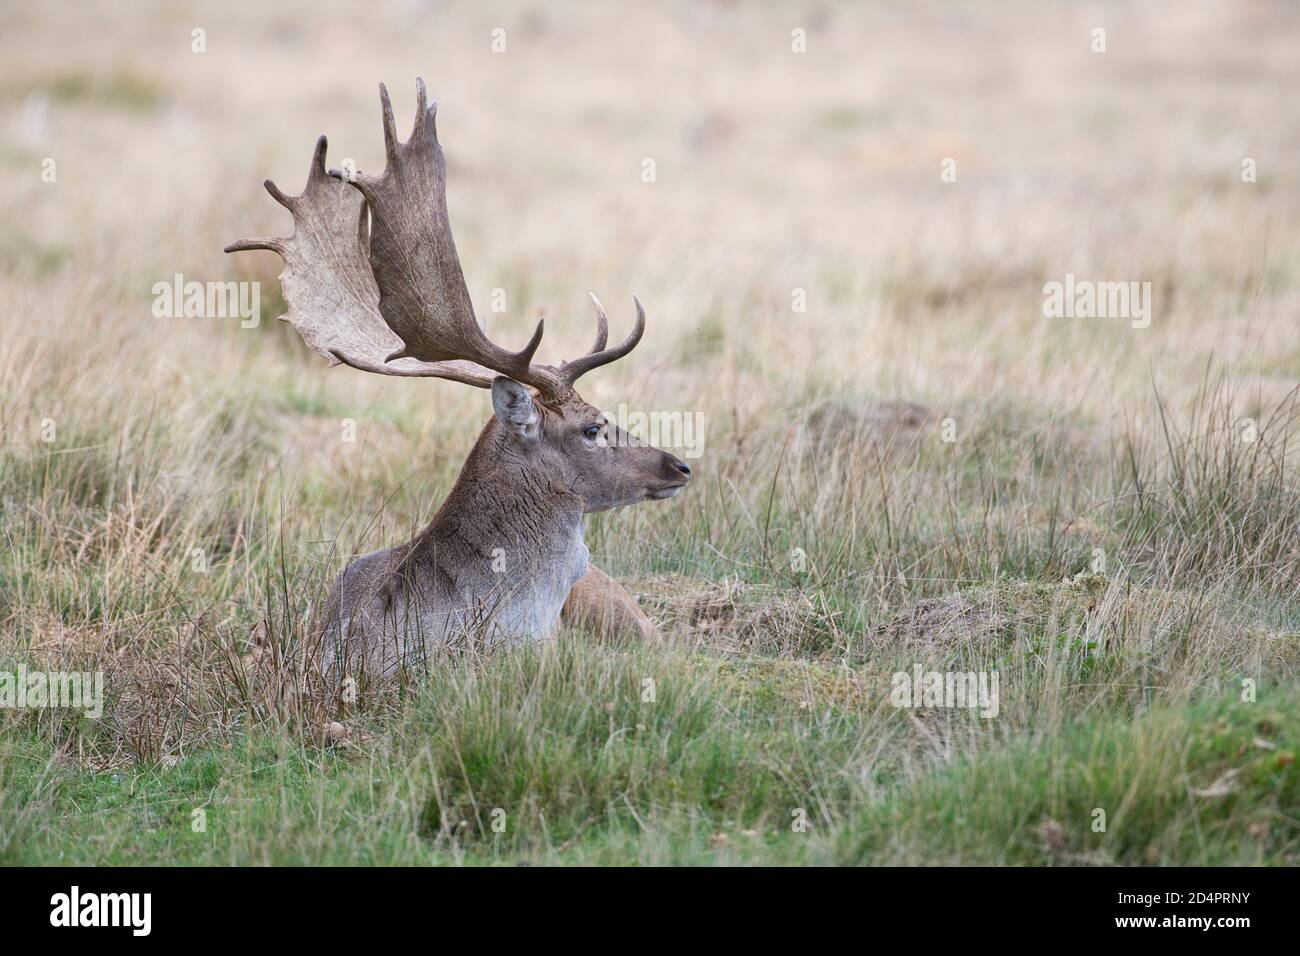 Fallow deer (Dama dama), male at rest, showing the typical palmate antlers of an adult buck of the species Stock Photo